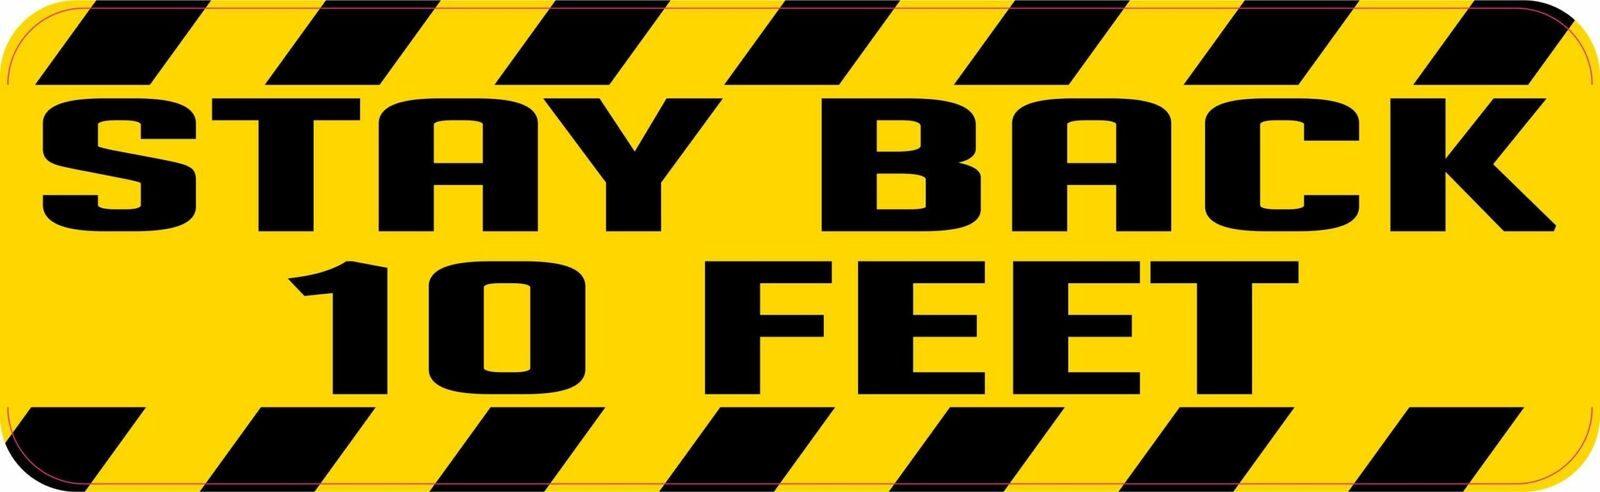 10in x 3in Stay Back 10 Feet Vinyl Sticker Business Sign Decal